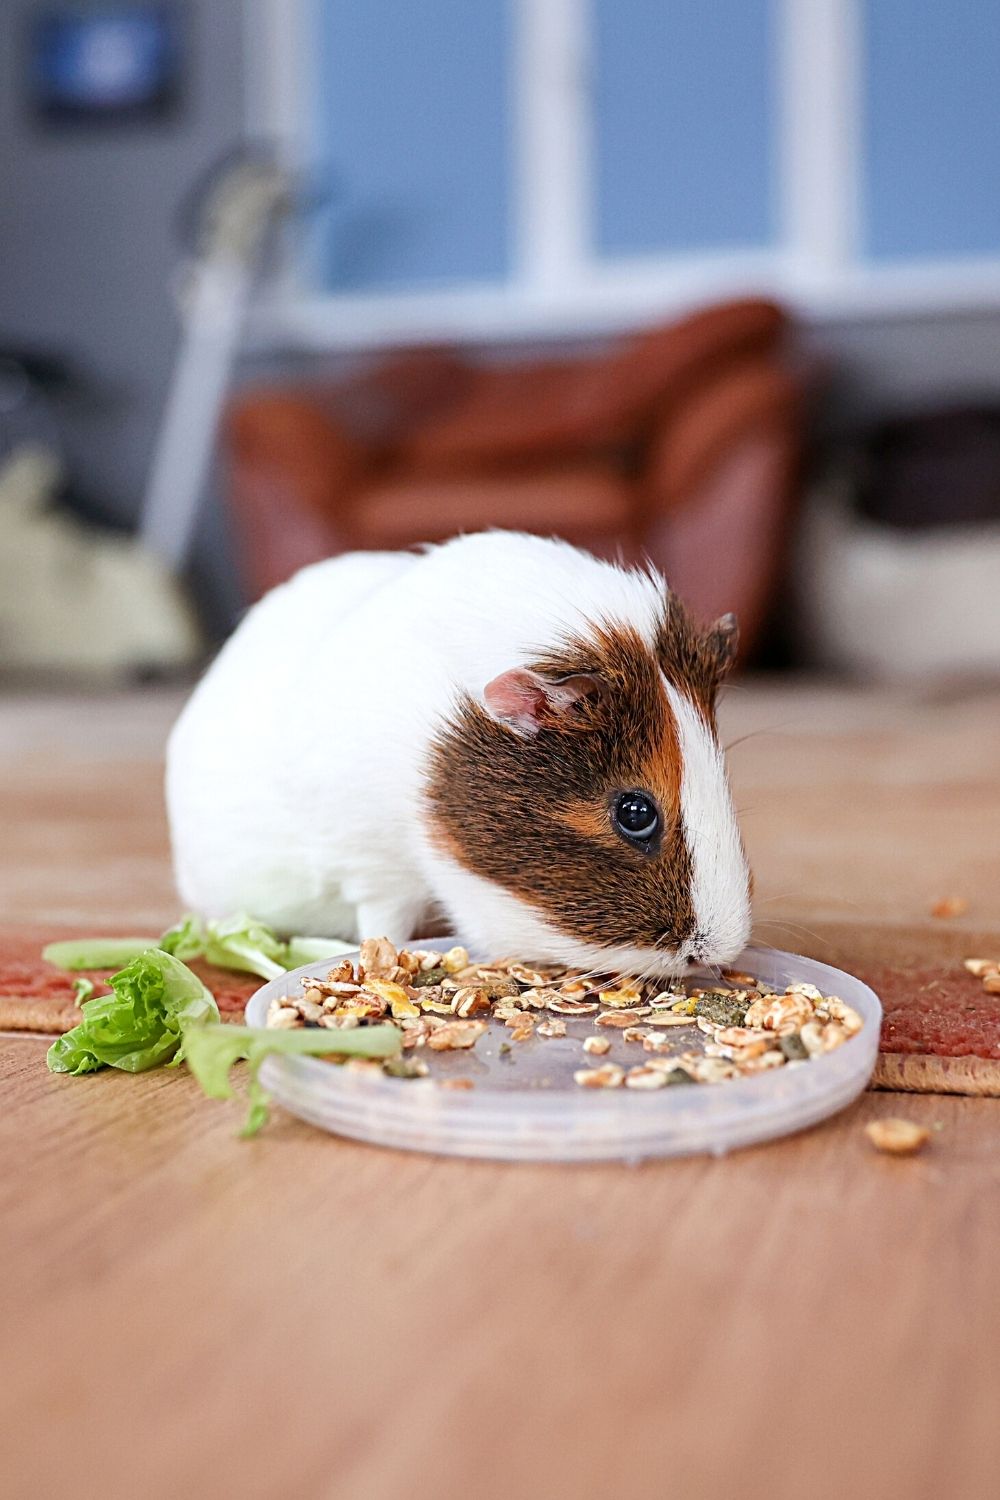 Pelleted rodent food should be your hamster's primary food, but you can supplement it with fruits and veggies